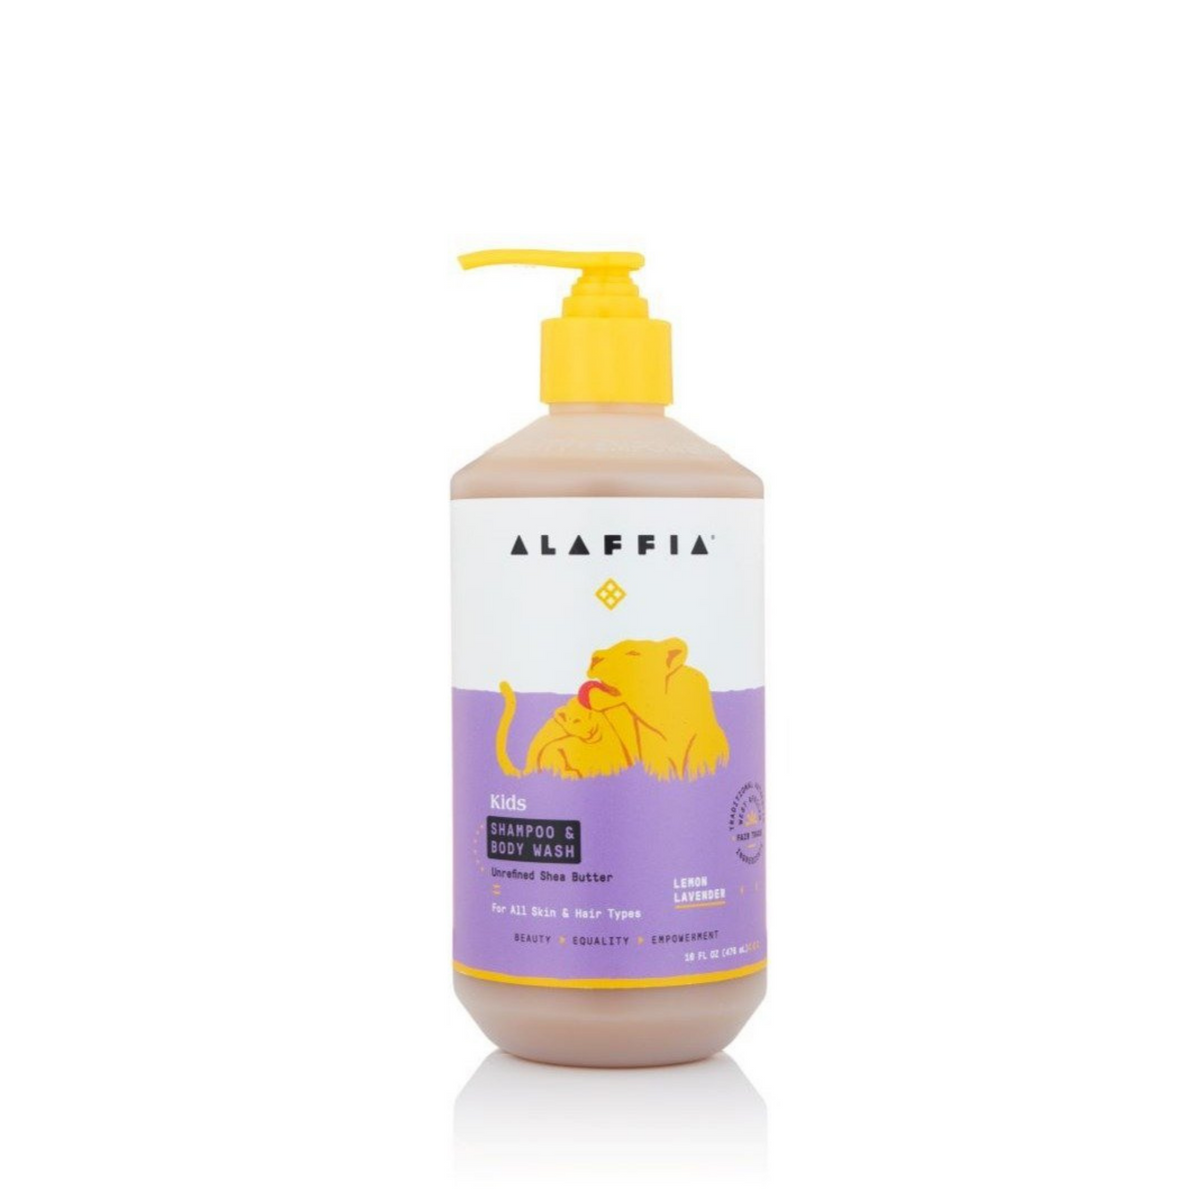 Primary image of Lemon Lavender Shea Butter Shampoo and Body Wash